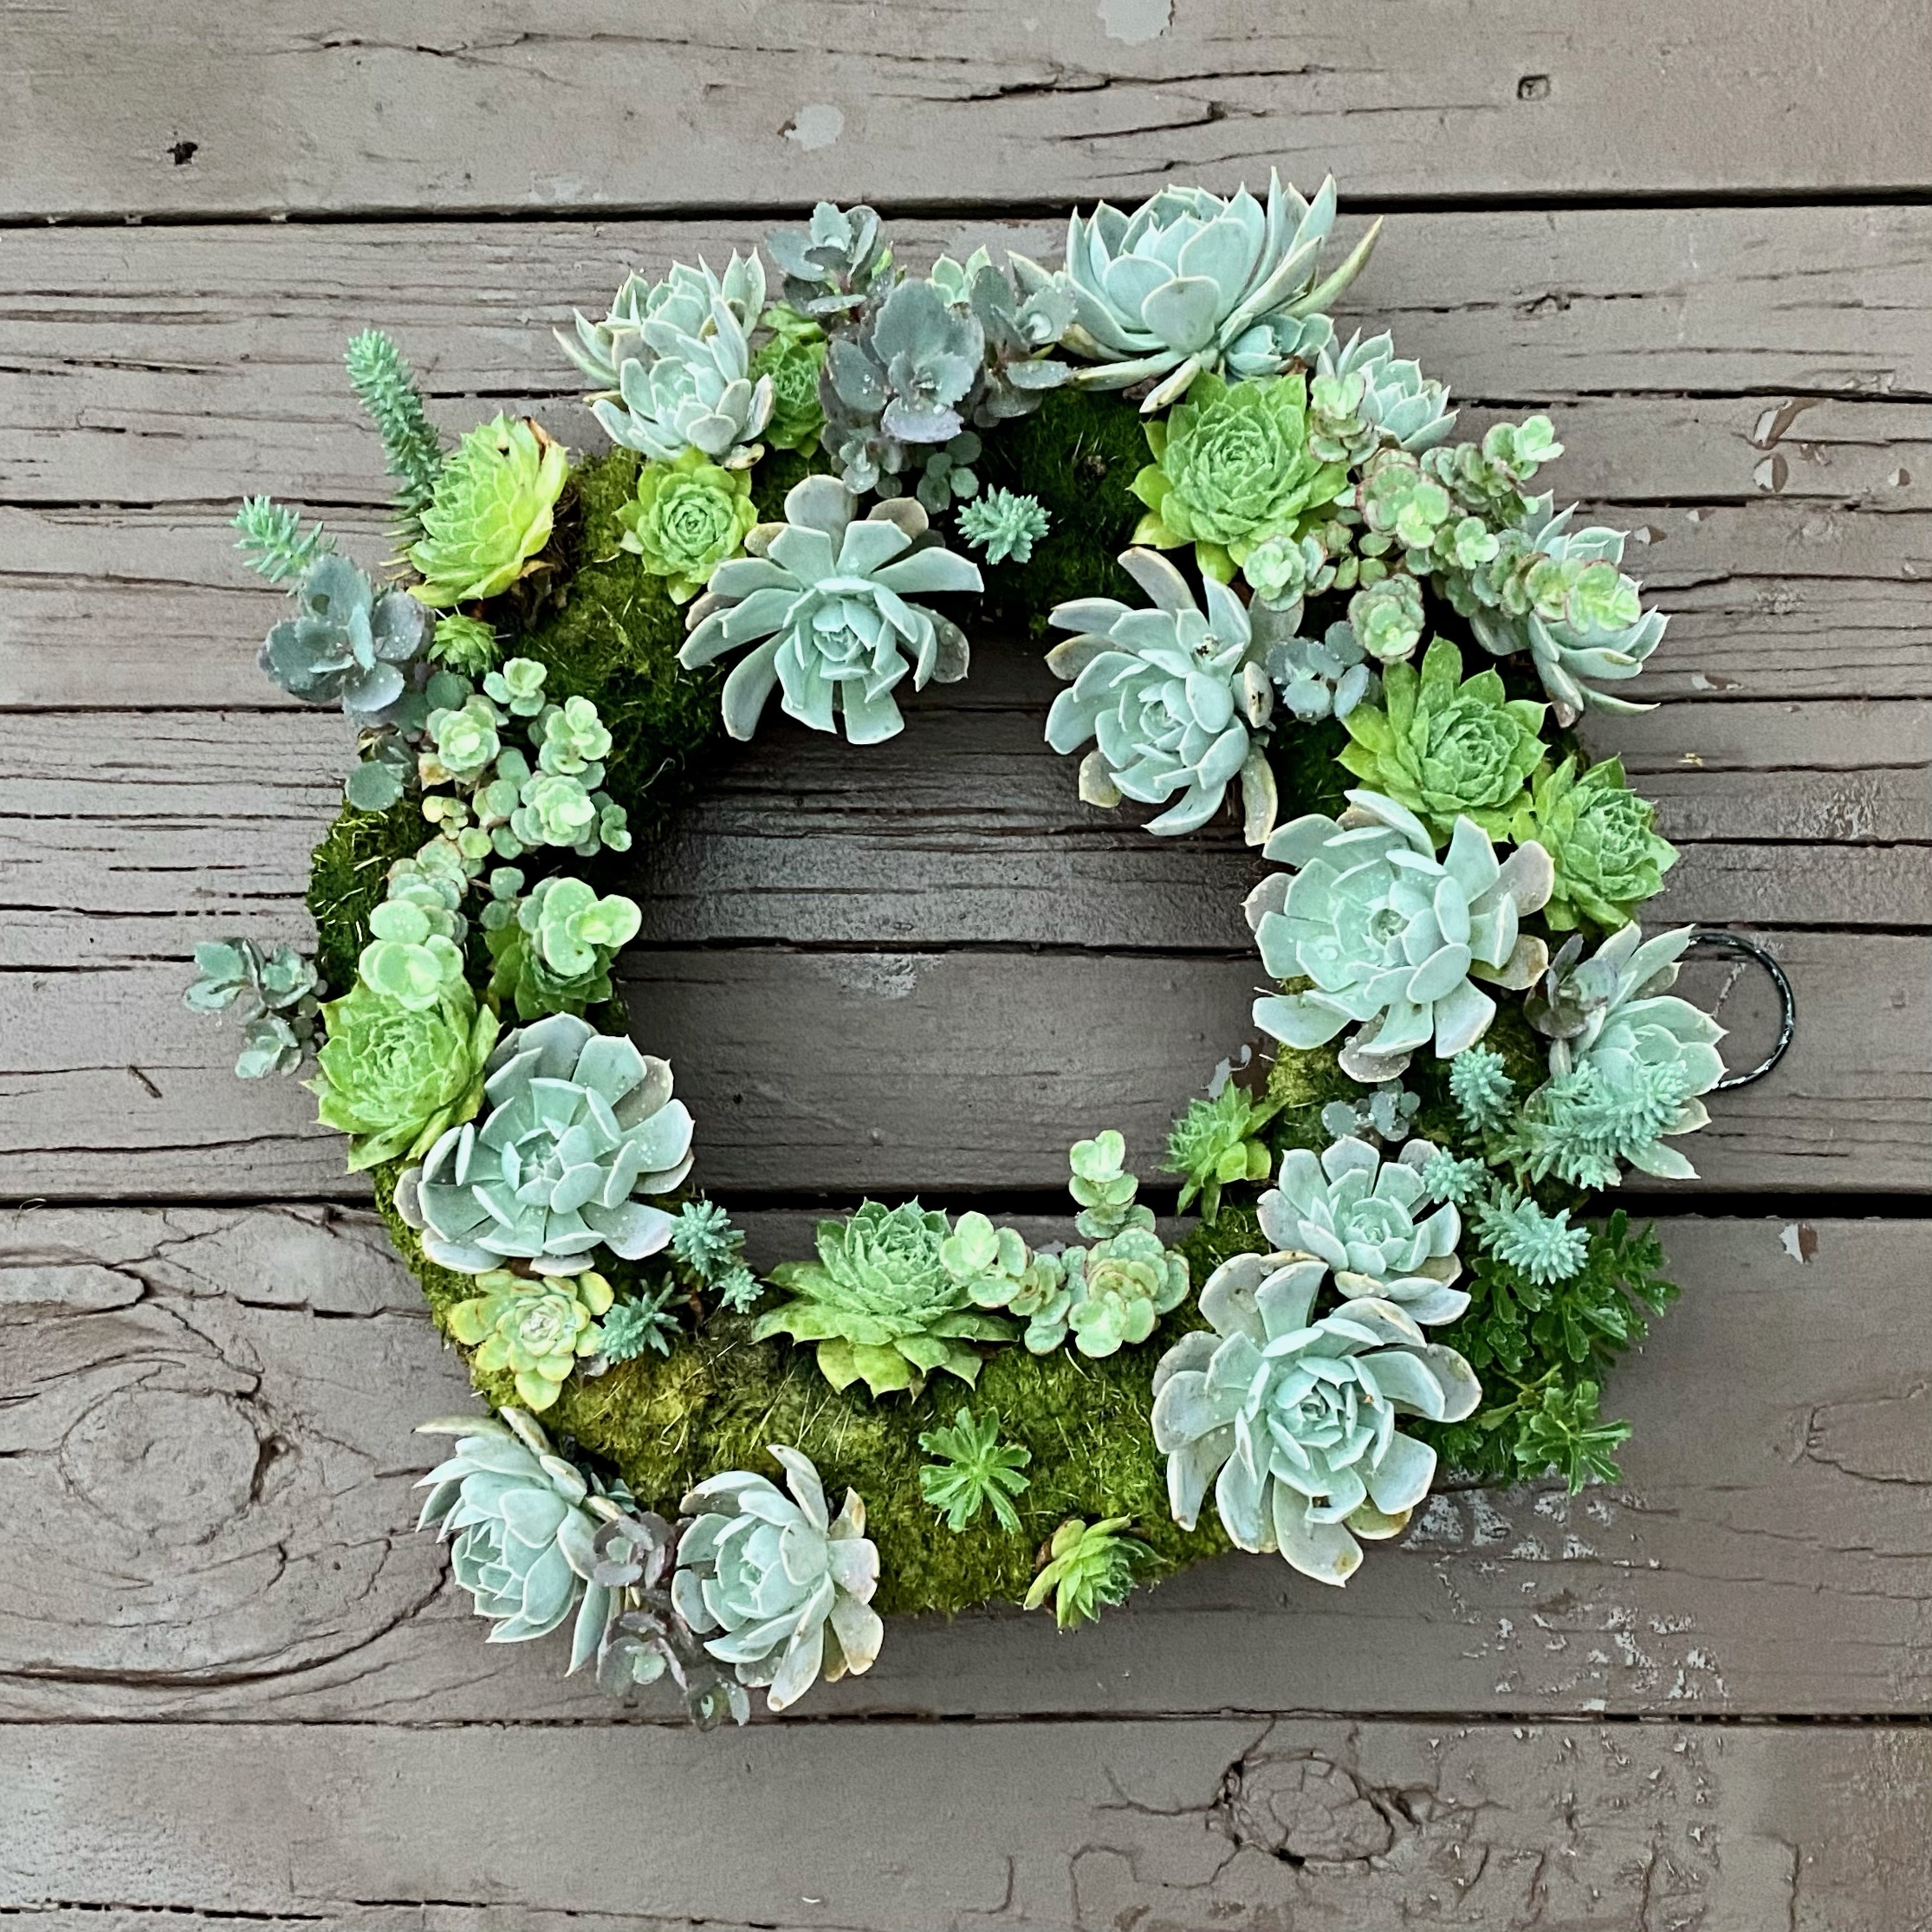 Wreath made from succulents